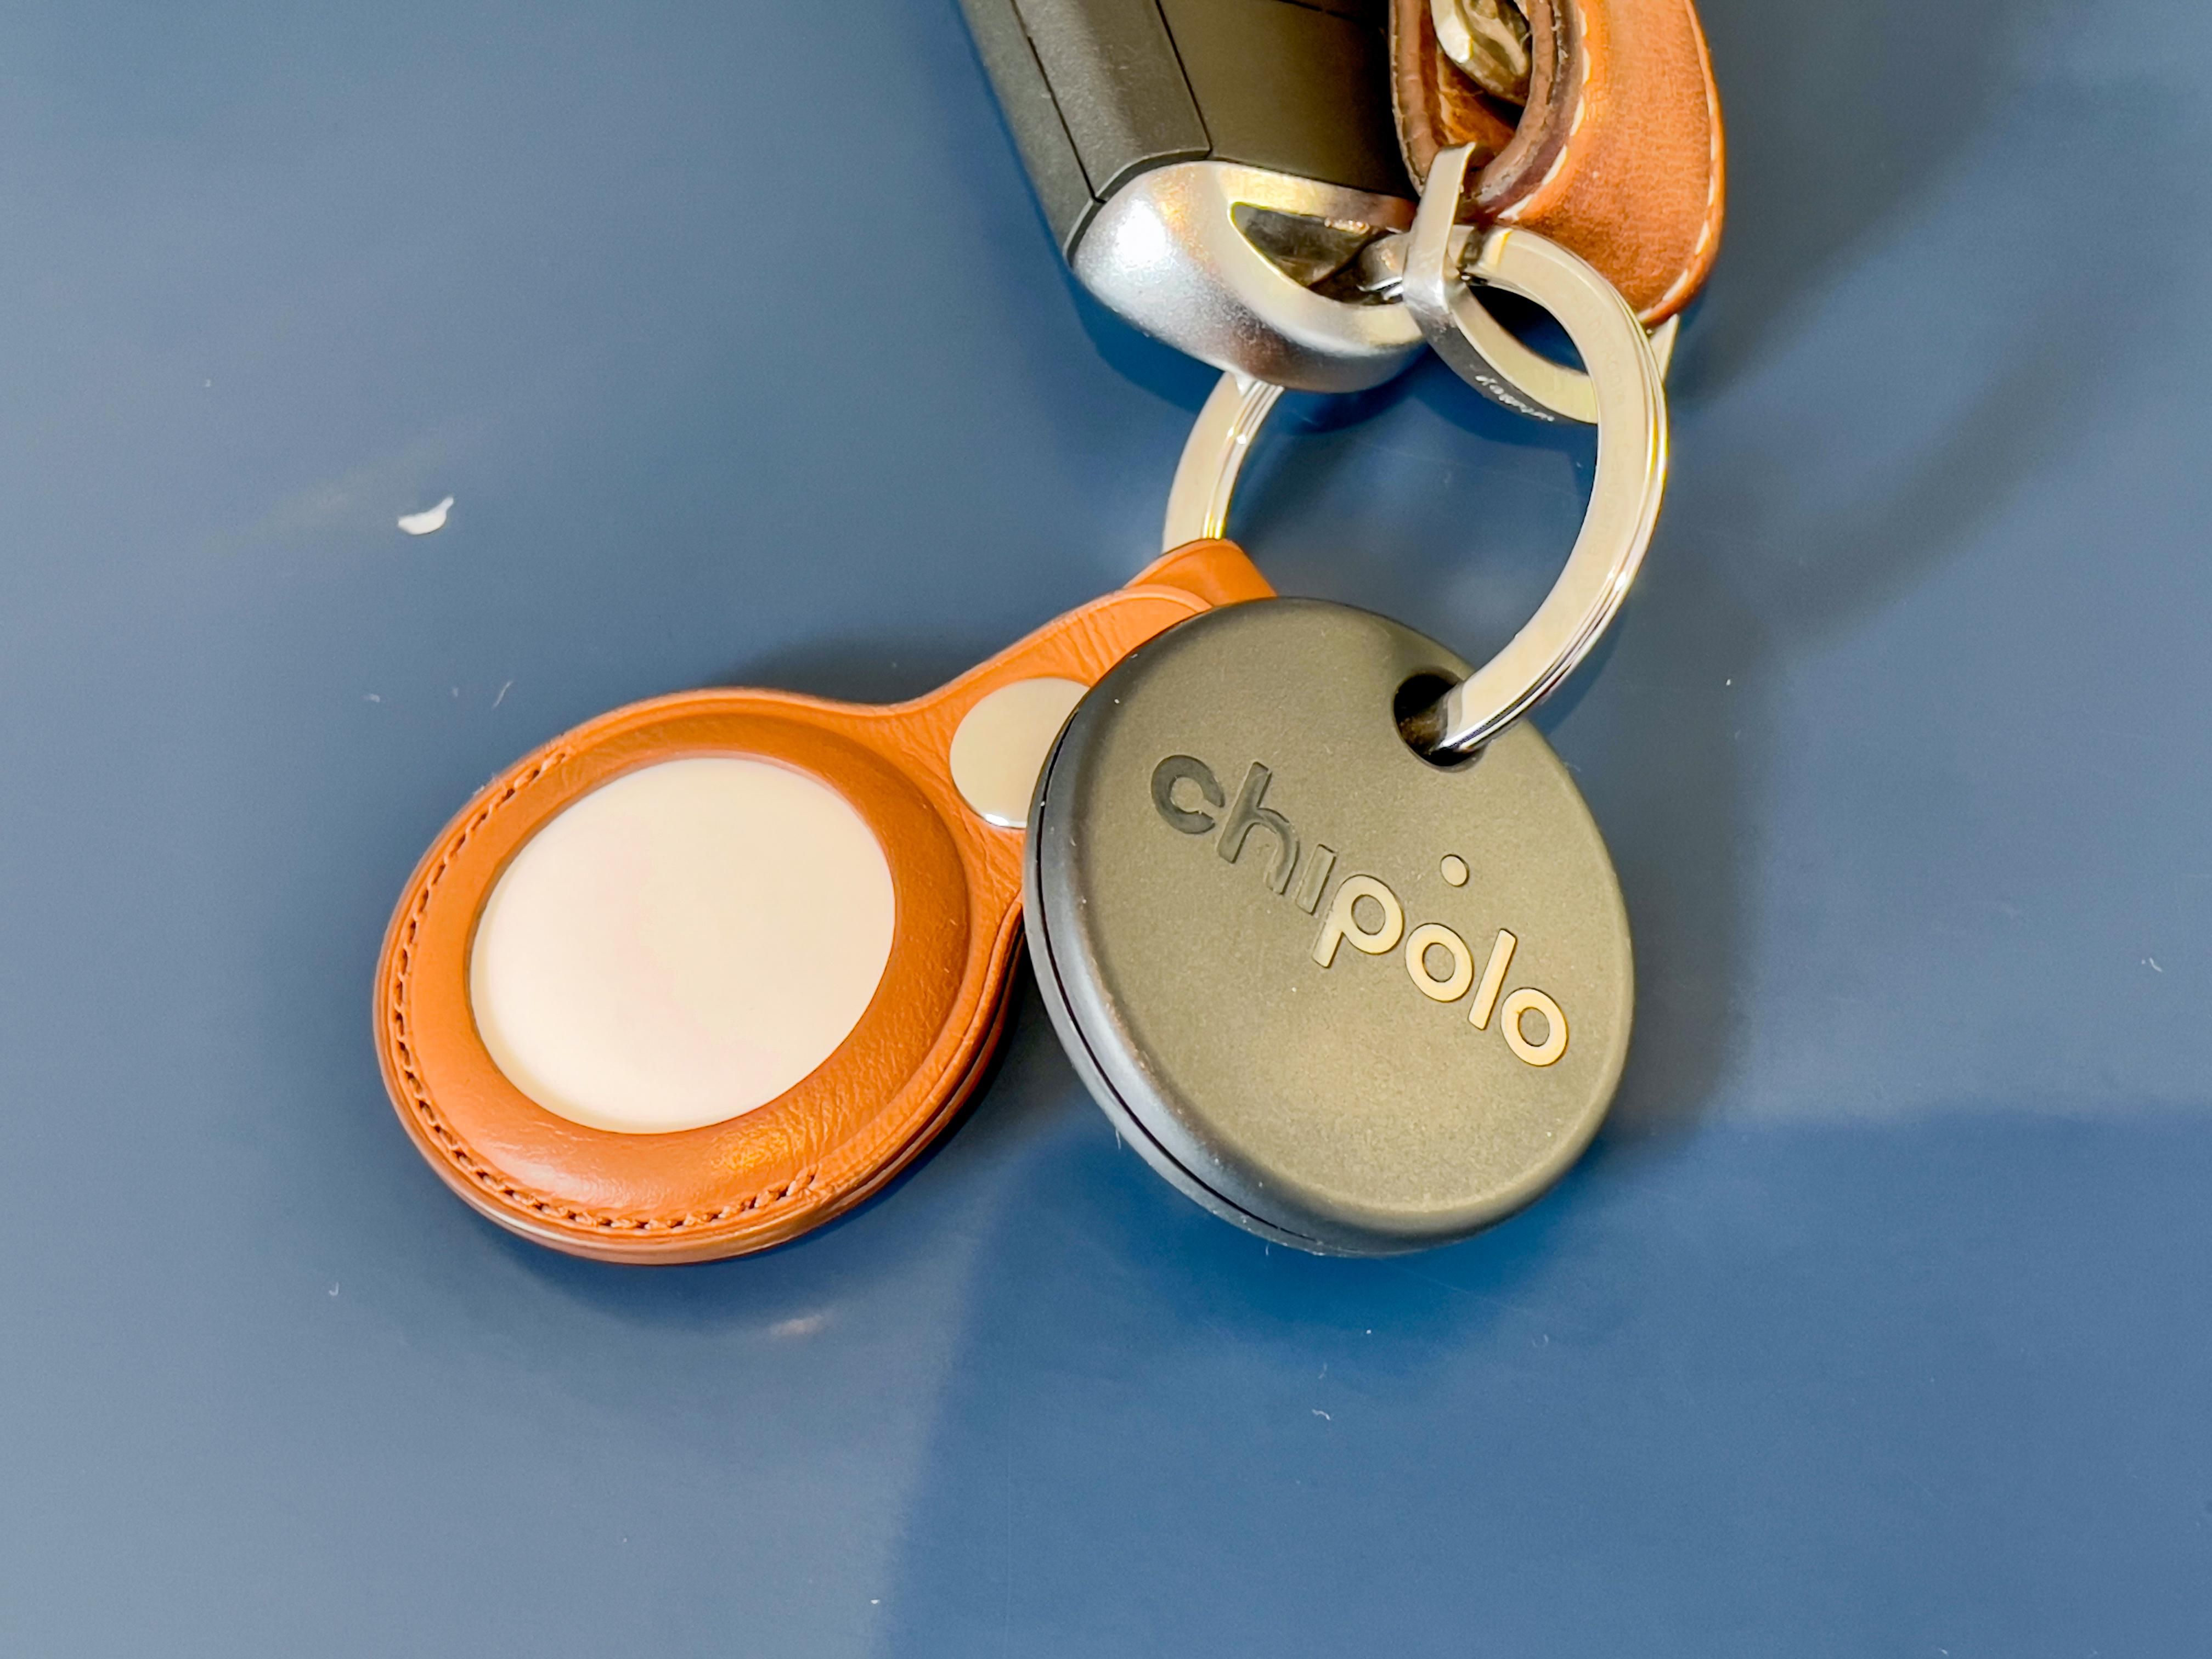 Chipolo One Spot review: Better than Apple's AirTag tracker